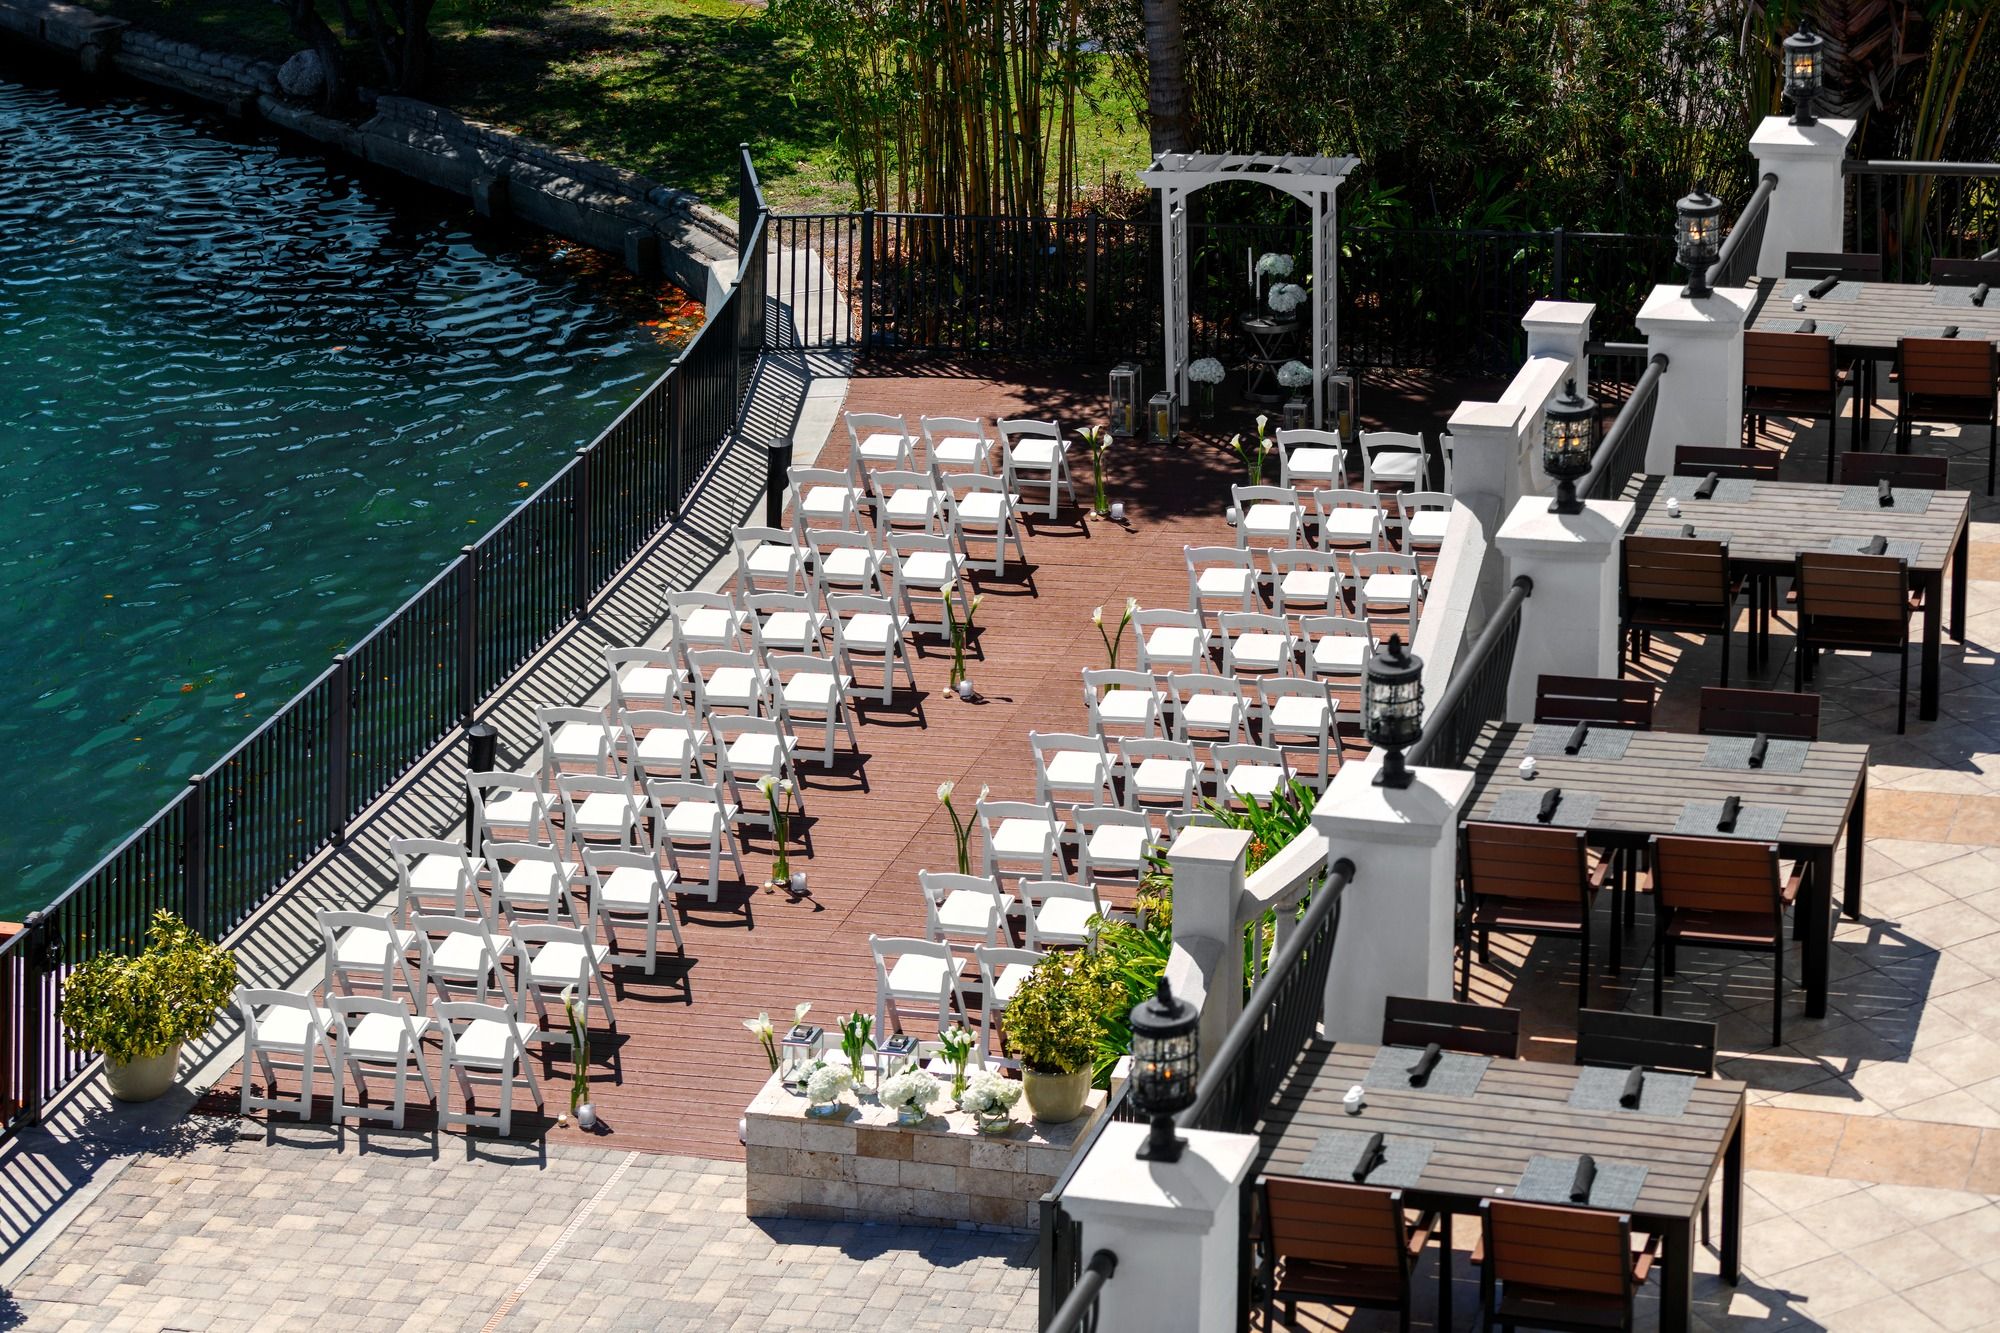 view of event space perfect for weddings with outdoor chairs and beautiful setting and view of the water